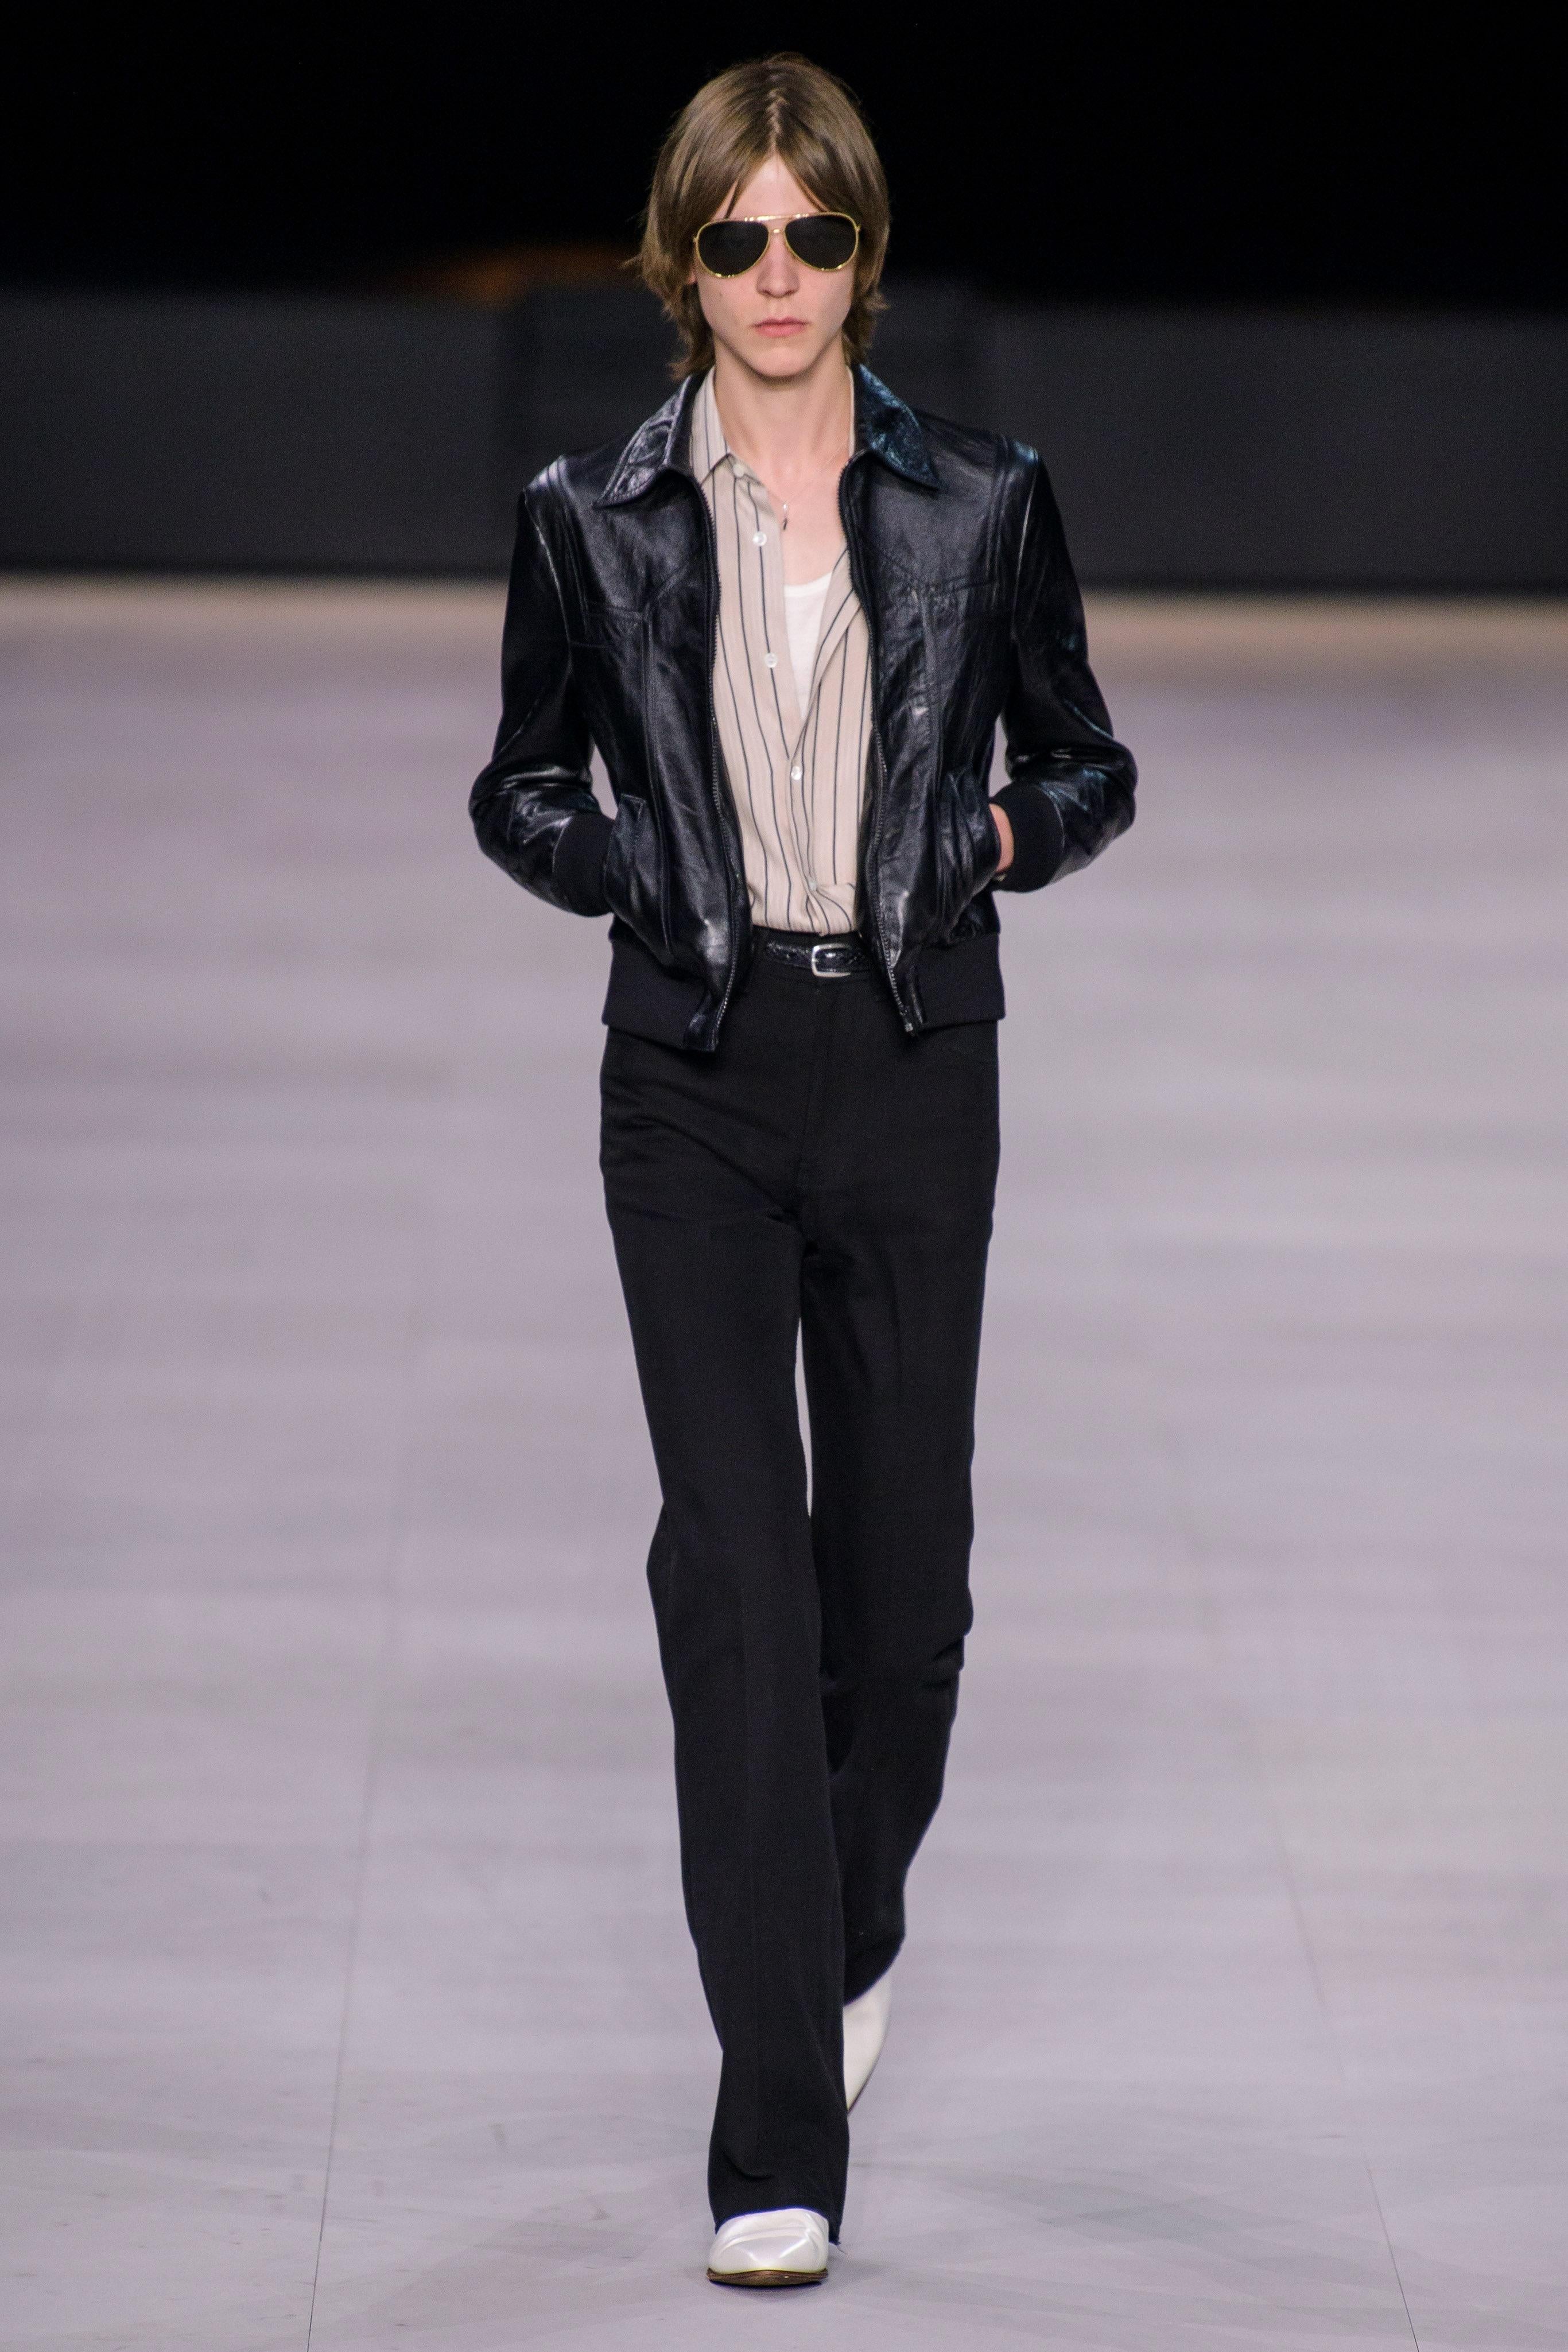 Striking black lamb leather bomber jacket by Celine from their Spring Summer 2020 collection. This piece was look number 46 on the runway.

This western style leather blouson is a classic wardrobe staple - short at the waist and with a fitted